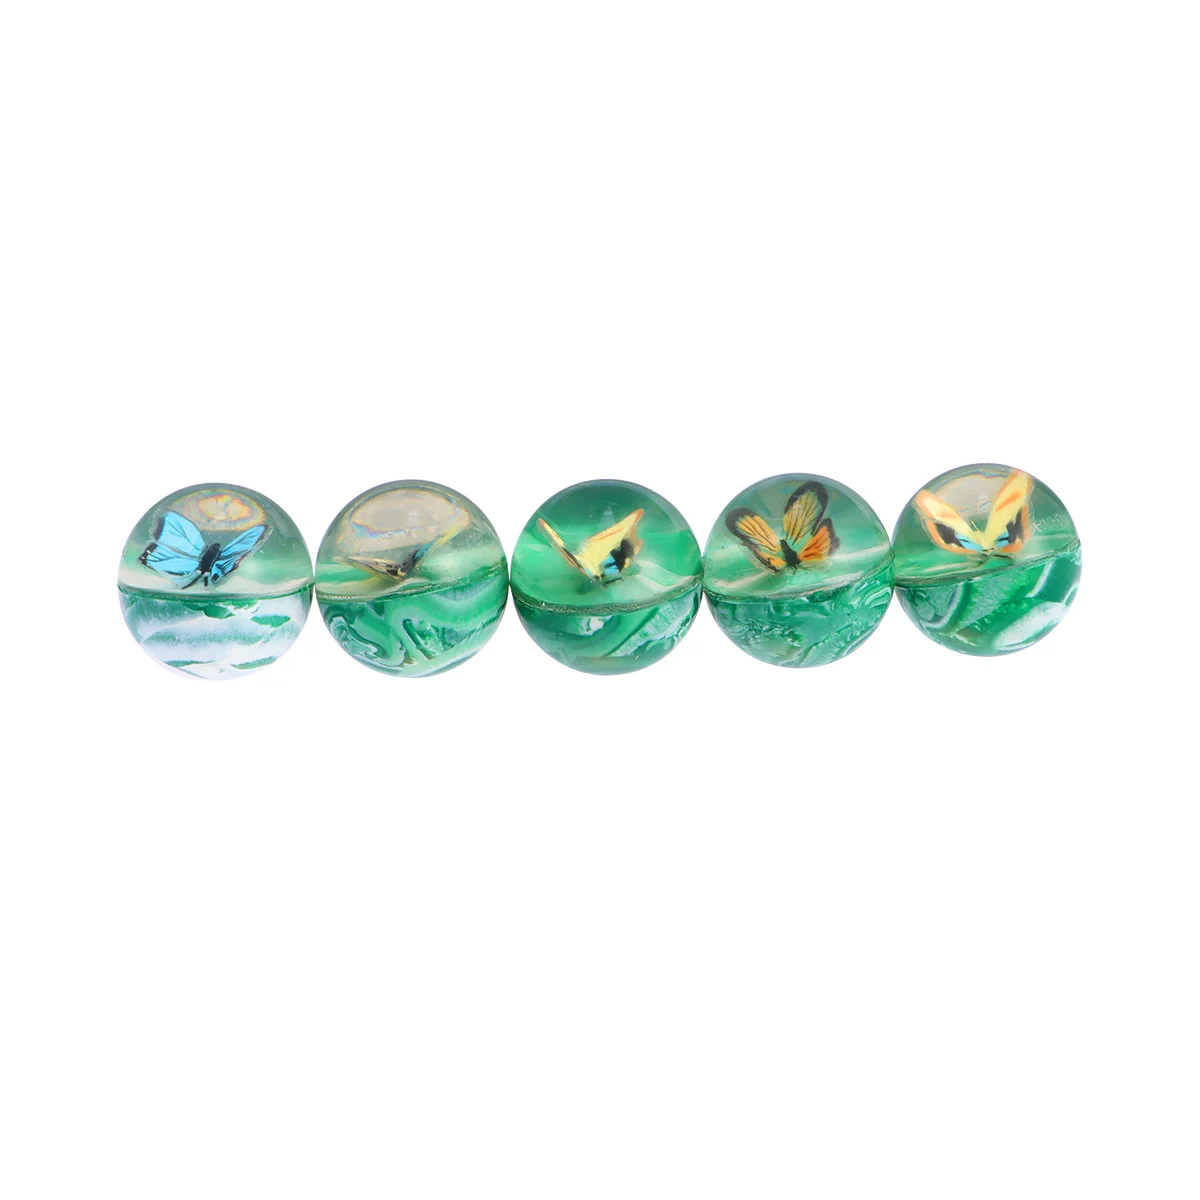 

5Pcs Designed Bouncy Ball Trasparent Rubber Ball Kids Funny Toy Cognitive Toys Green